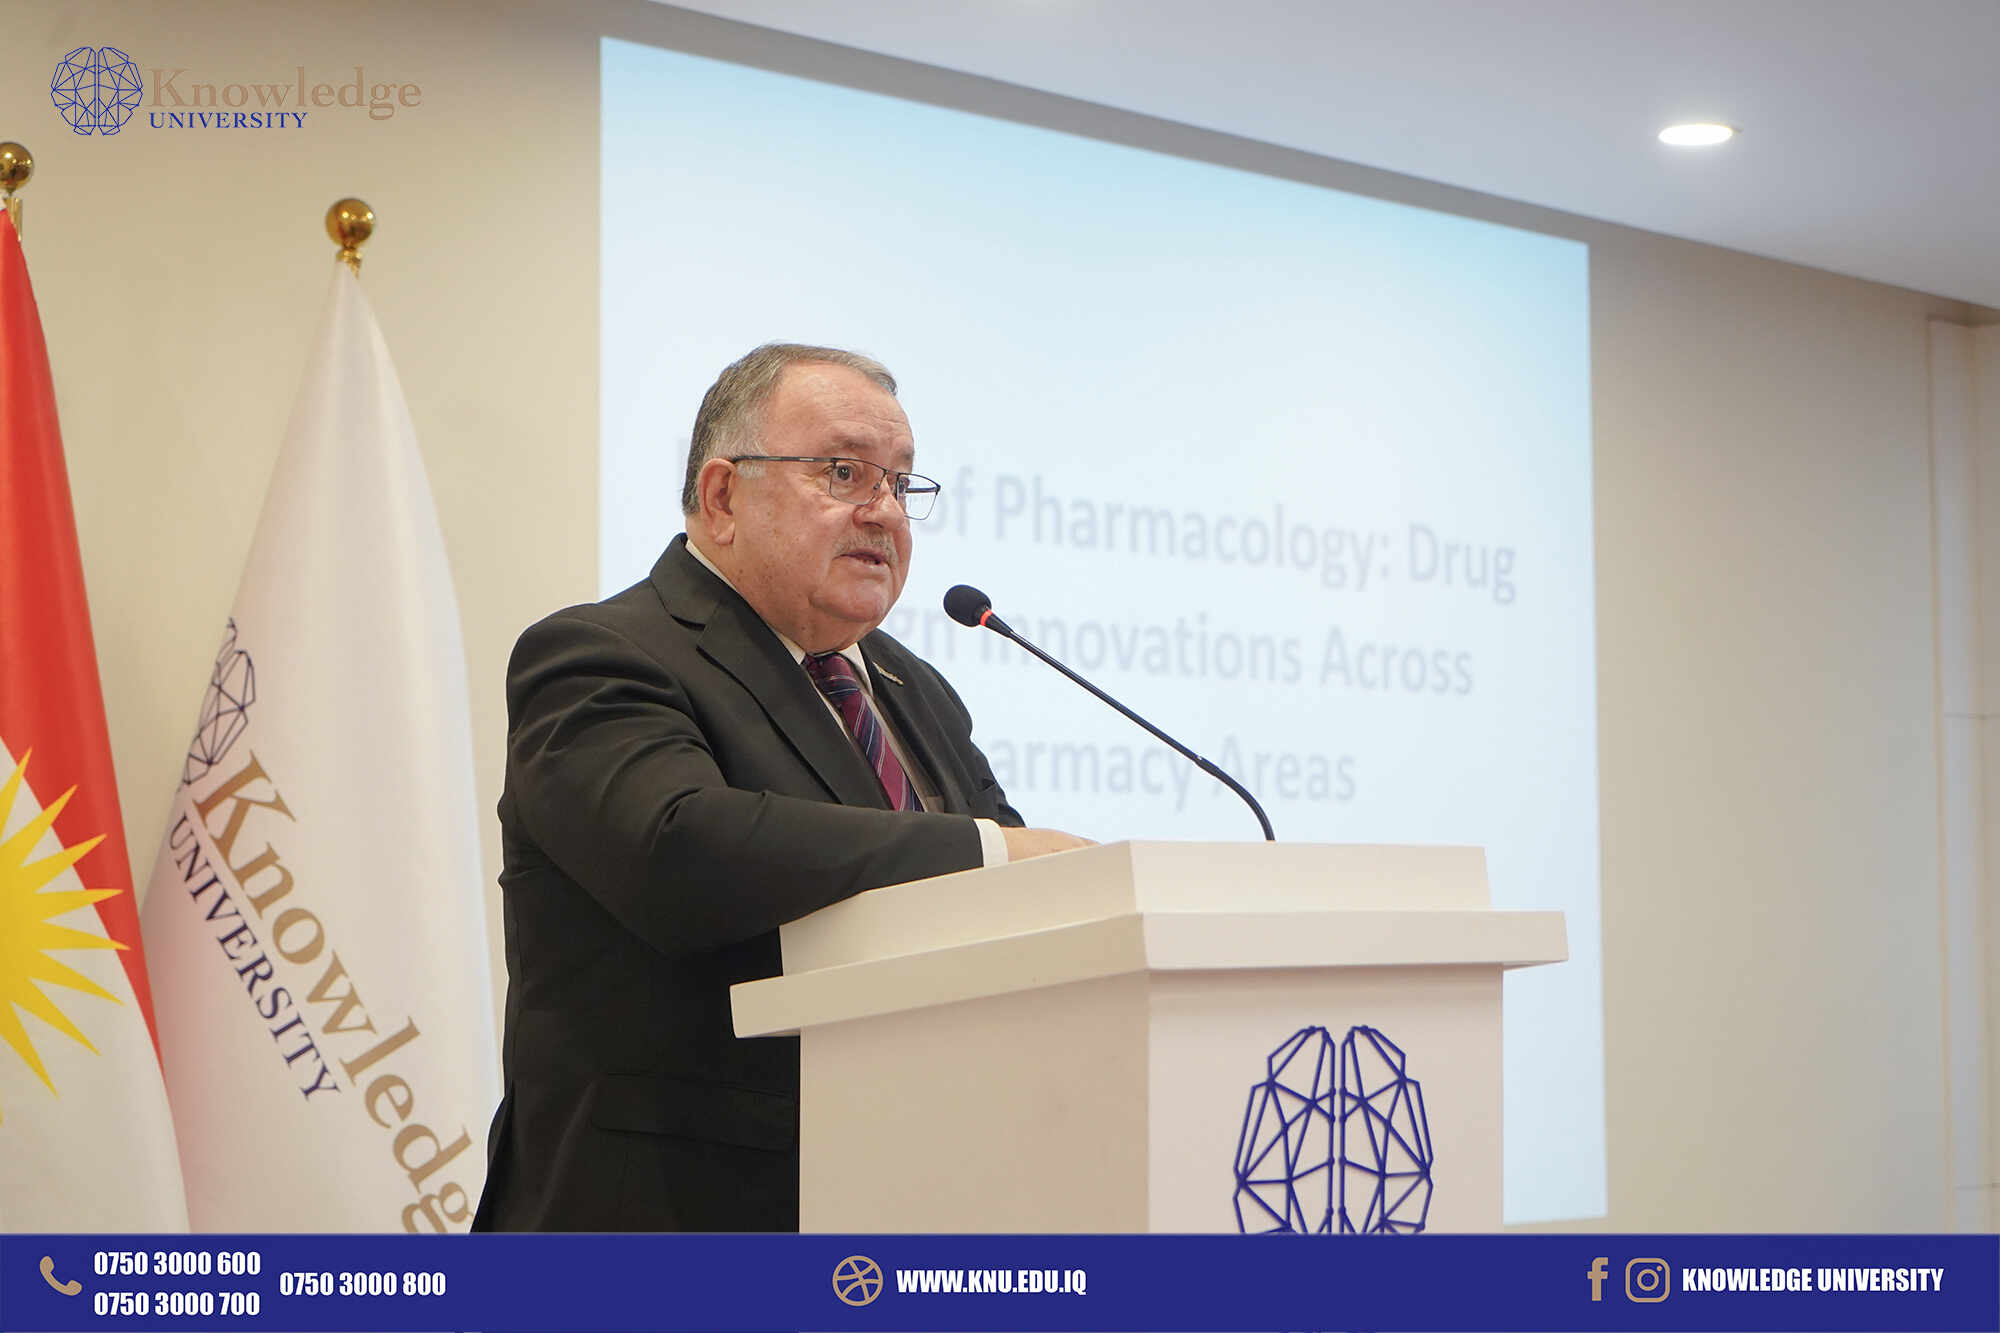 College of Pharmacy Hosts Training Course to Enhance Pharmacy Students Skills